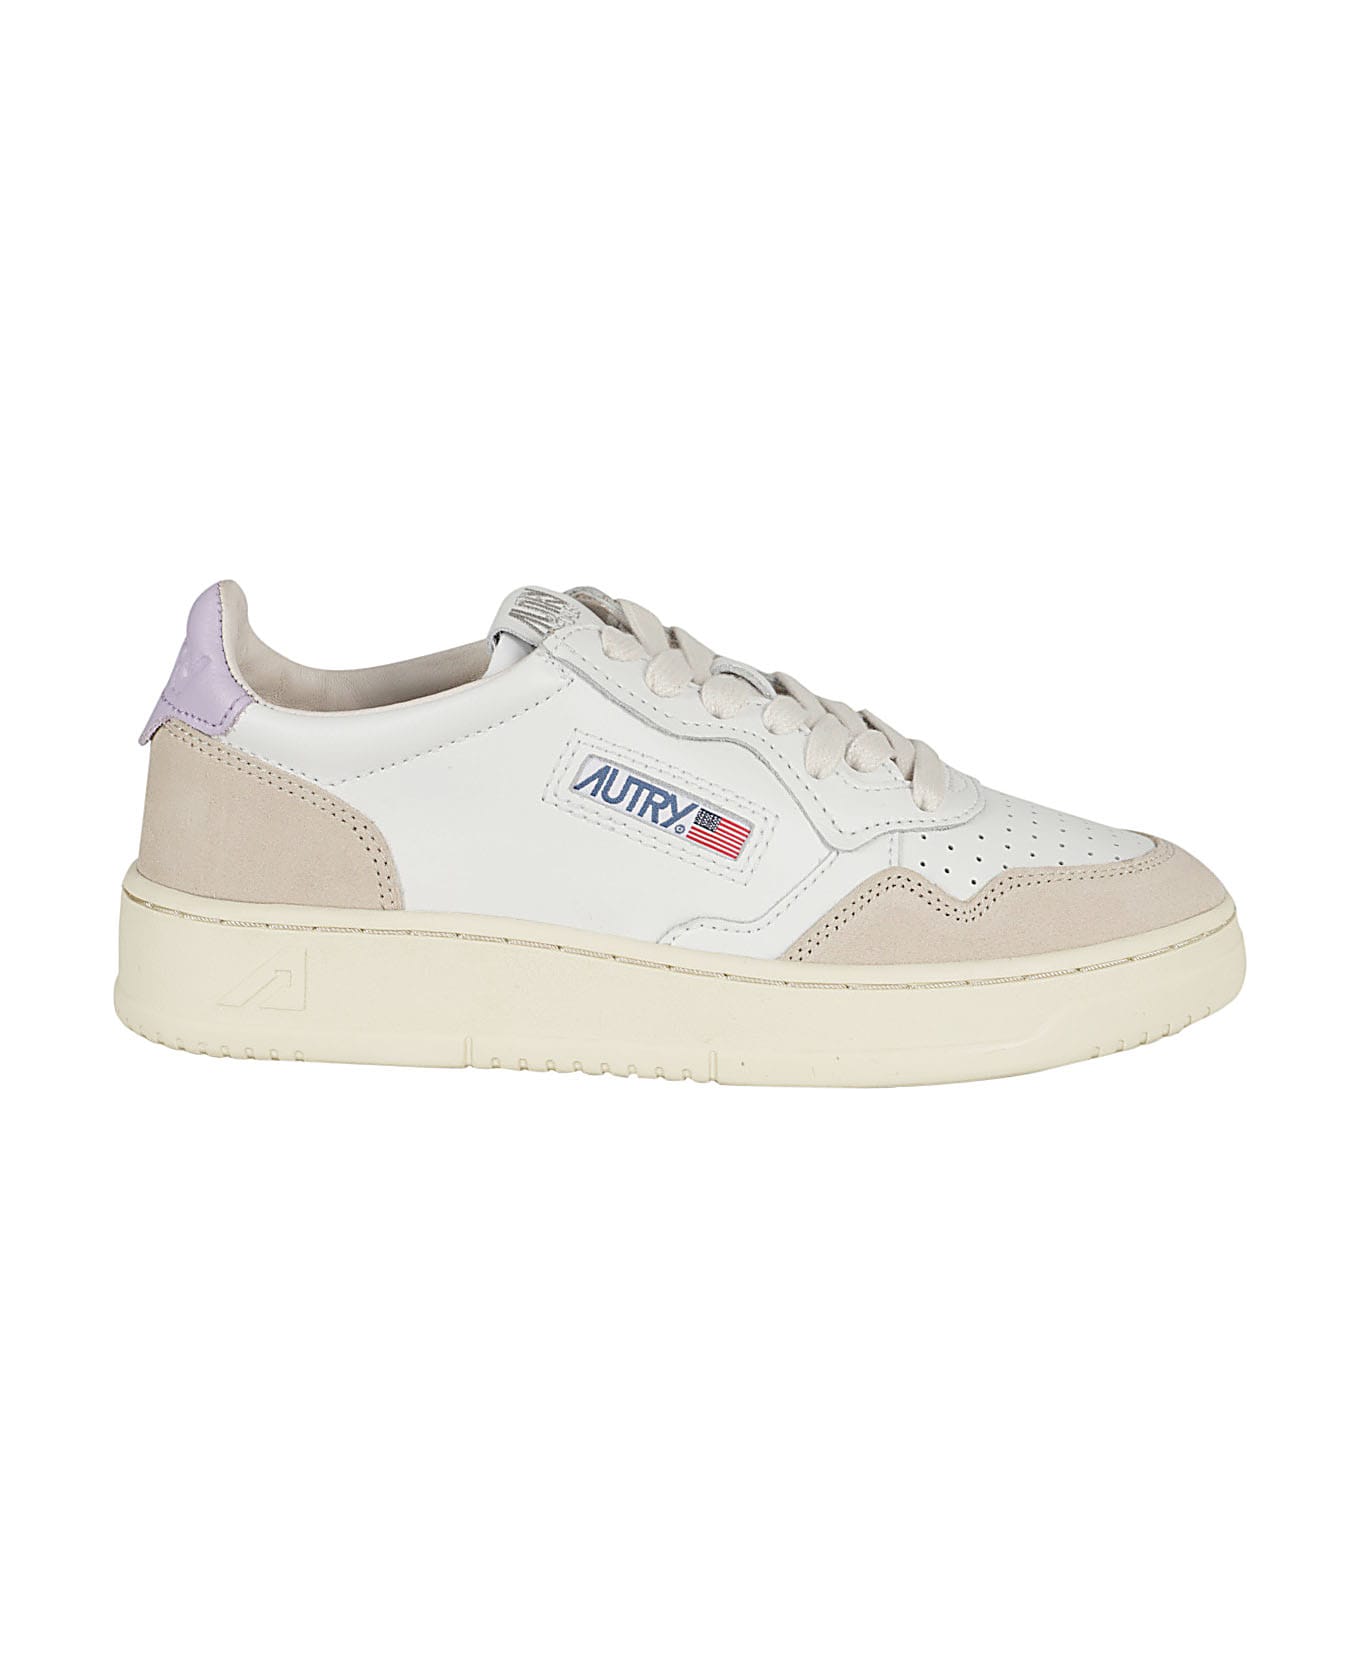 Autry Medalist Low Wom - Suede Lilac